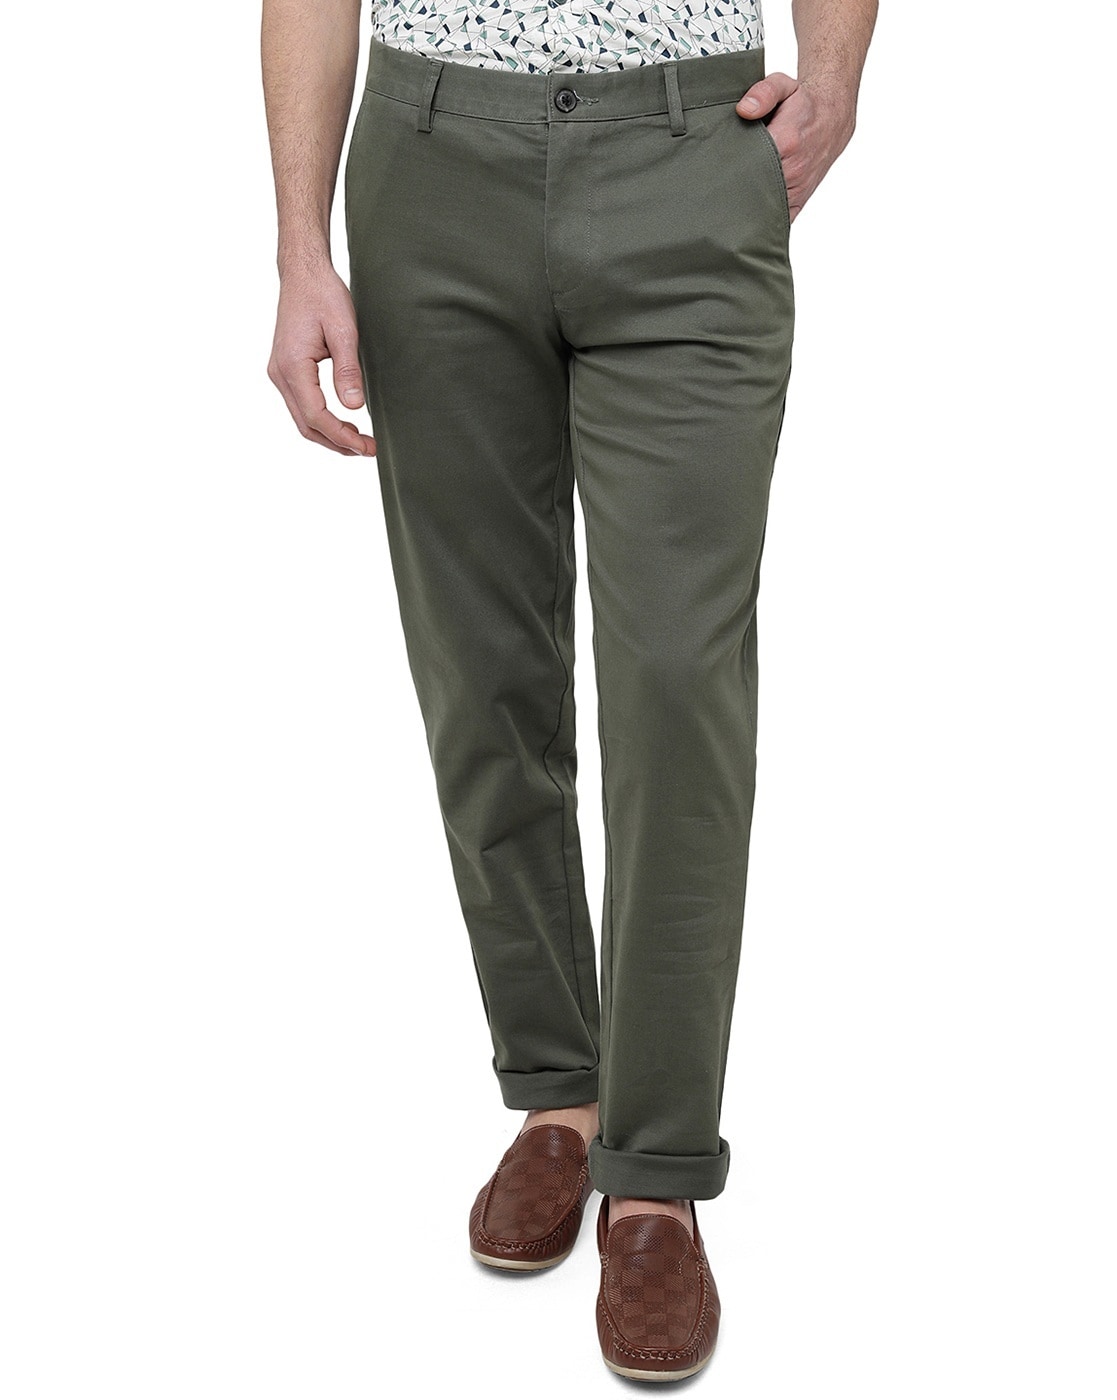 Olive Green Shirt With Matching Pants  Best Color Combination Ideas For  Men  by Look Stylish  YouTube